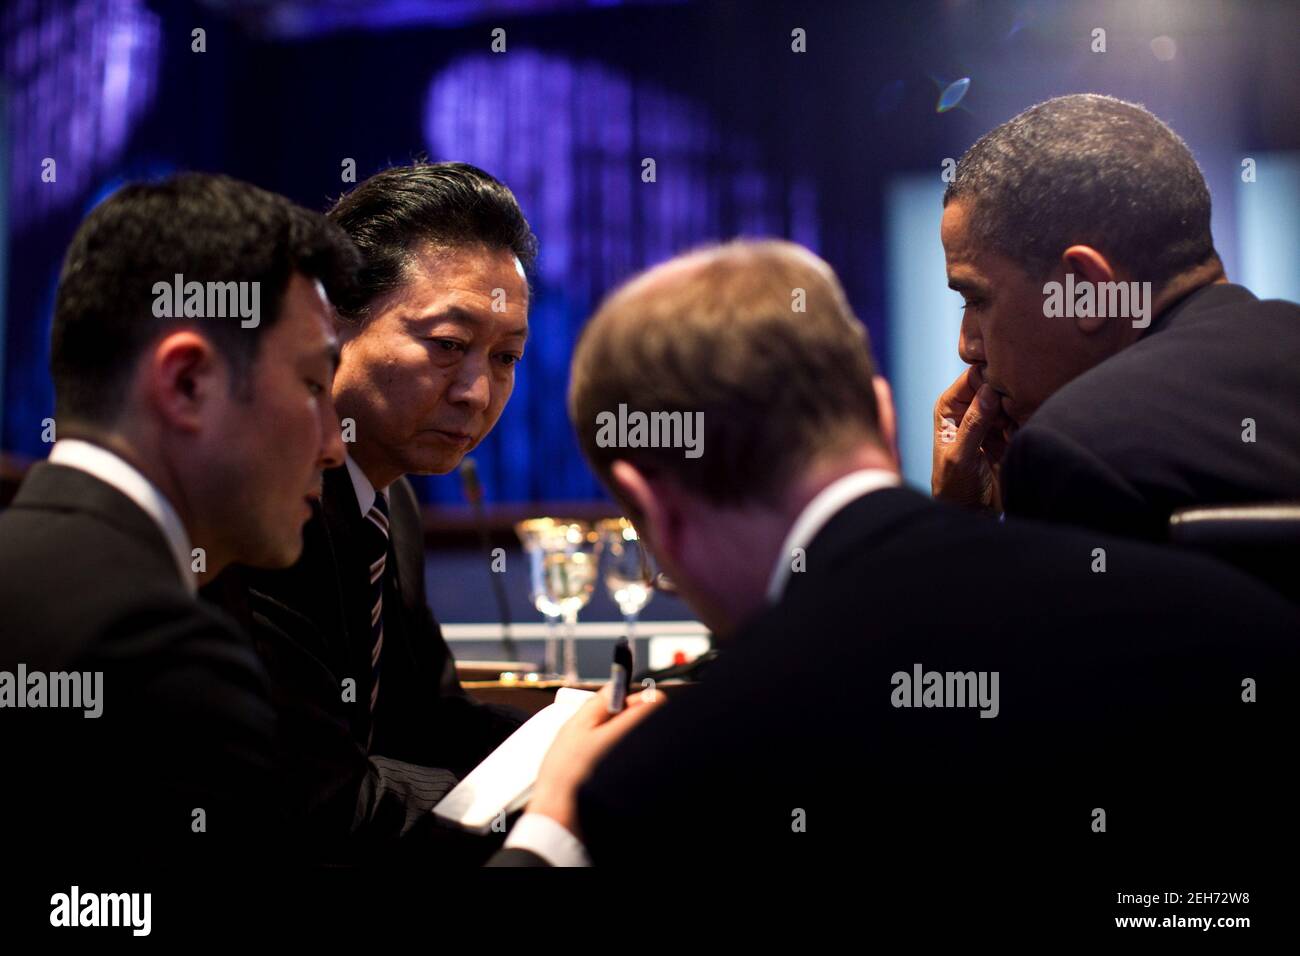 President Barack Obama talks with Prime Minister Yukio Hatoyama of Japan, during a working dinner for Heads of Delegation at the Nuclear Security Summit at the Walter E. Washington Convention Center in Washington, D.C., April 12, 2010. Stock Photo